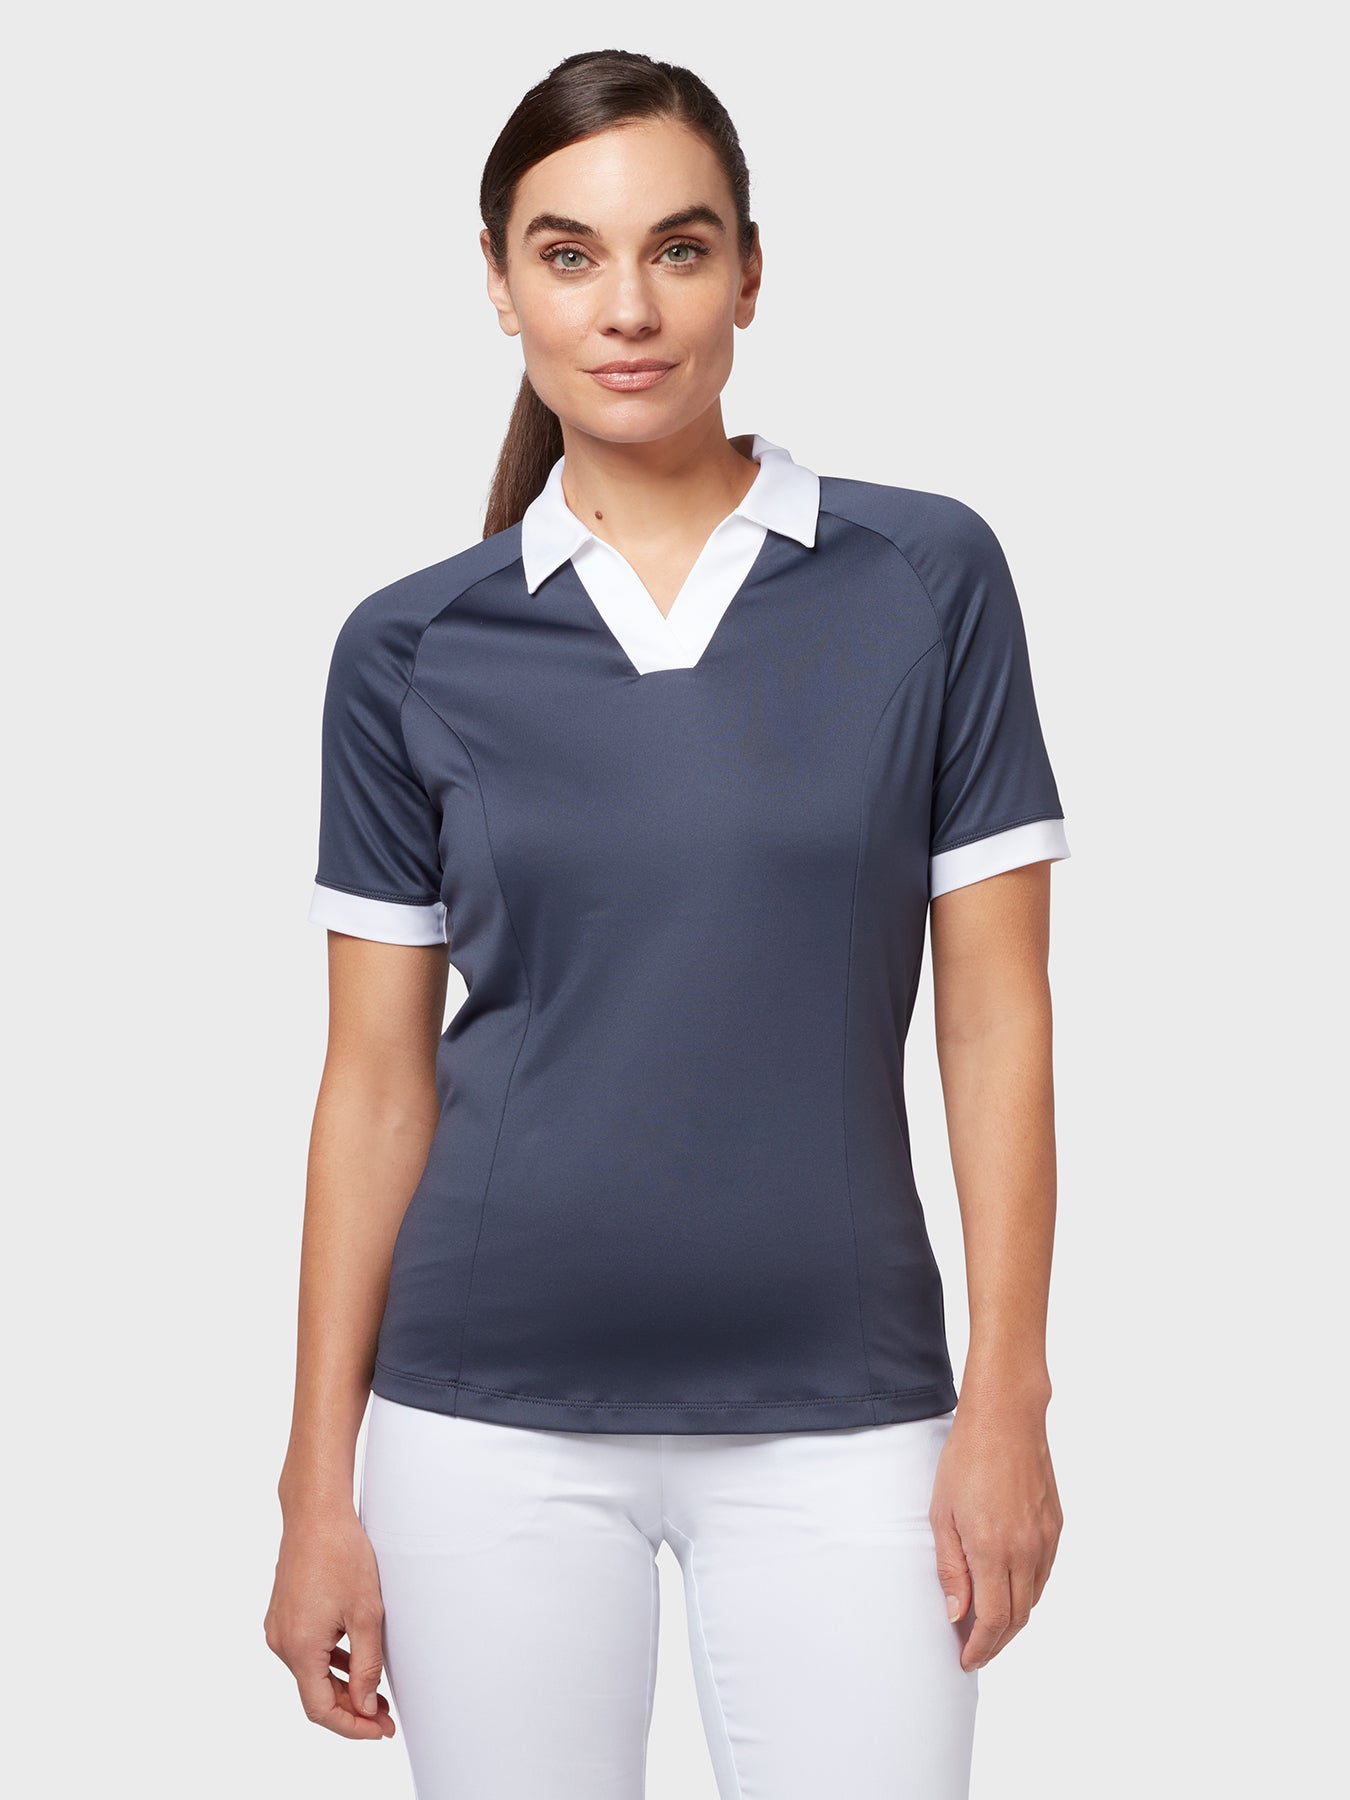 View VPlacket Colourblock Womens Polo In Odyssey Gray Odyssey Gray XS information